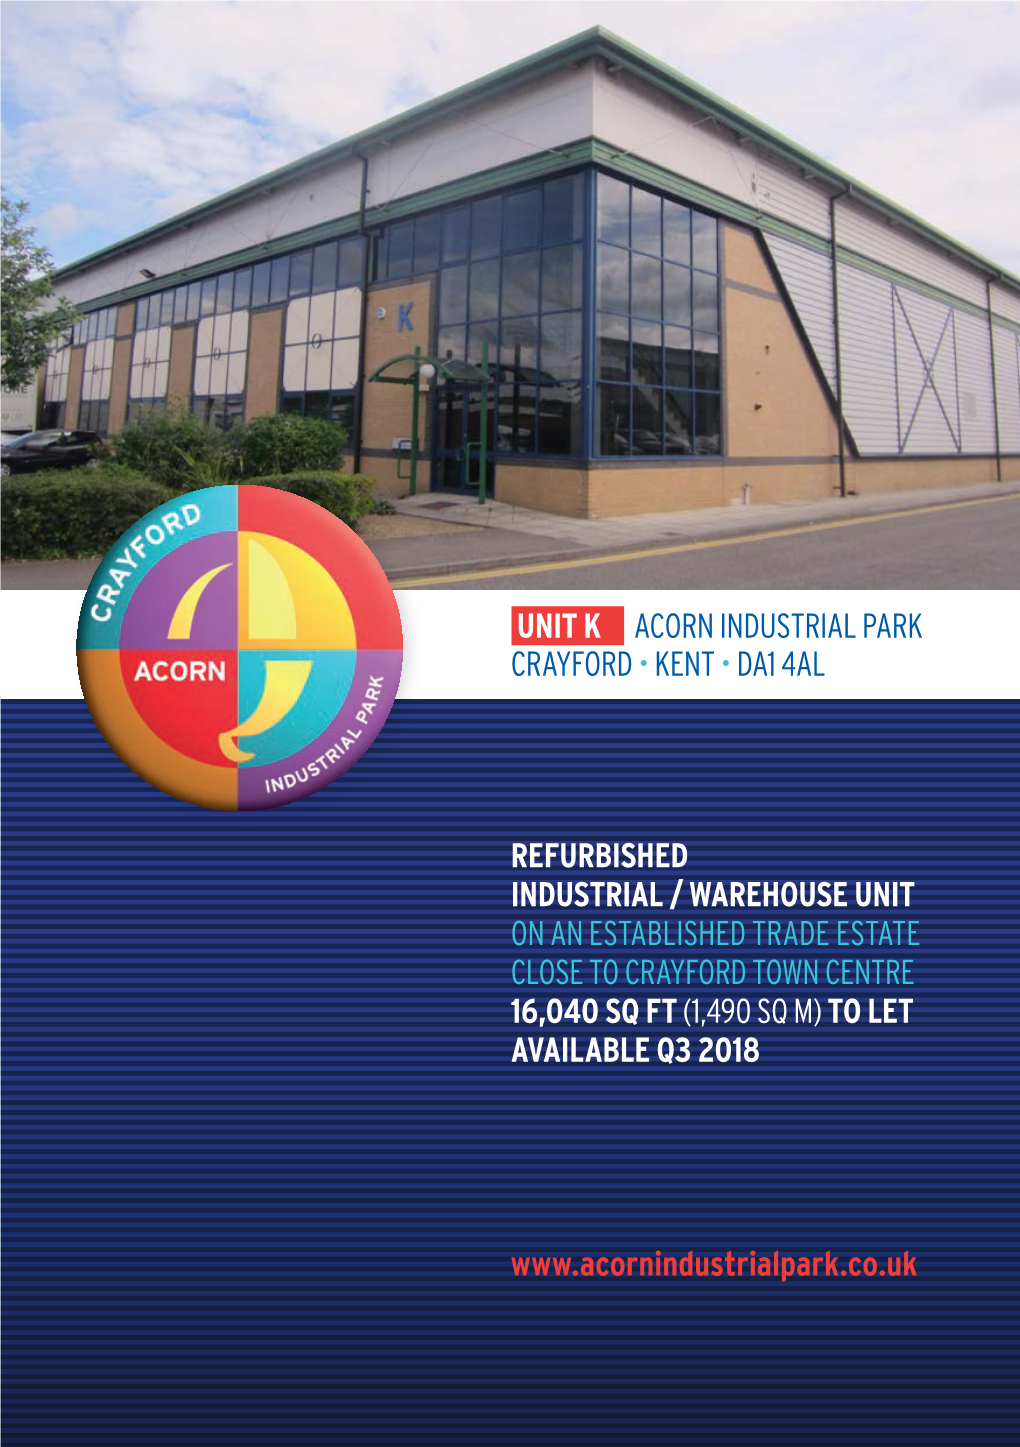 Refurbished Industrial / Warehouse Unit on an Established Trade Estate Close to Crayford Town Centre 16,040 Sq Ft (1,490 Sq M) to Let Available Q3 2018